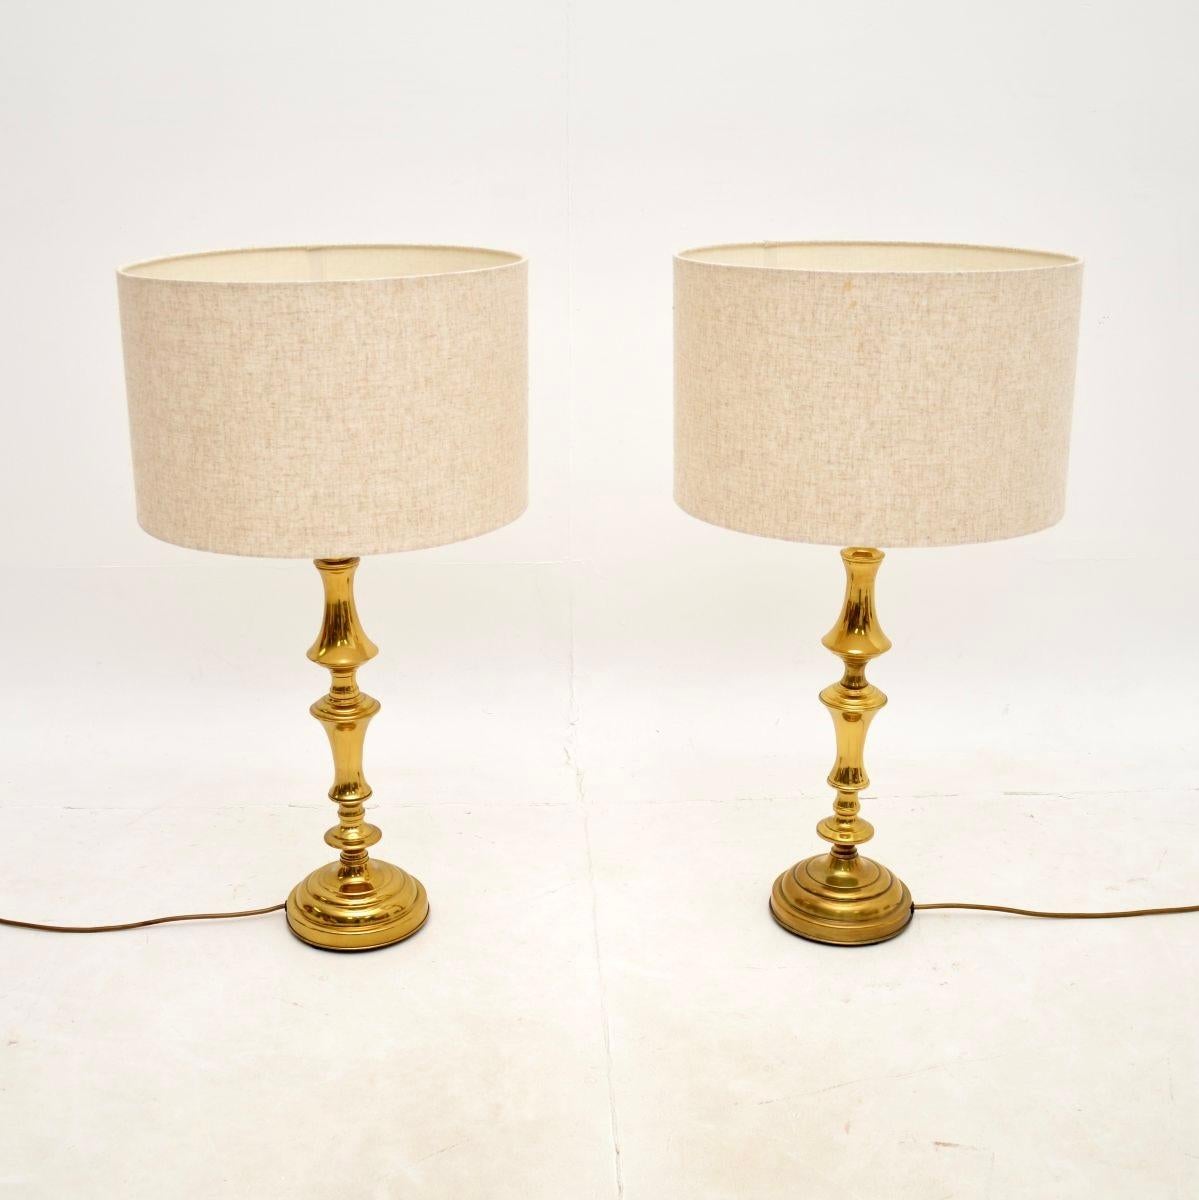 A superb pair of large vintage brass table lamps. They were made in England, and they date from the 1970’s.

The quality is outstanding, the solid brass frames are very large, impressive and well made.

The condition is excellent, with only some